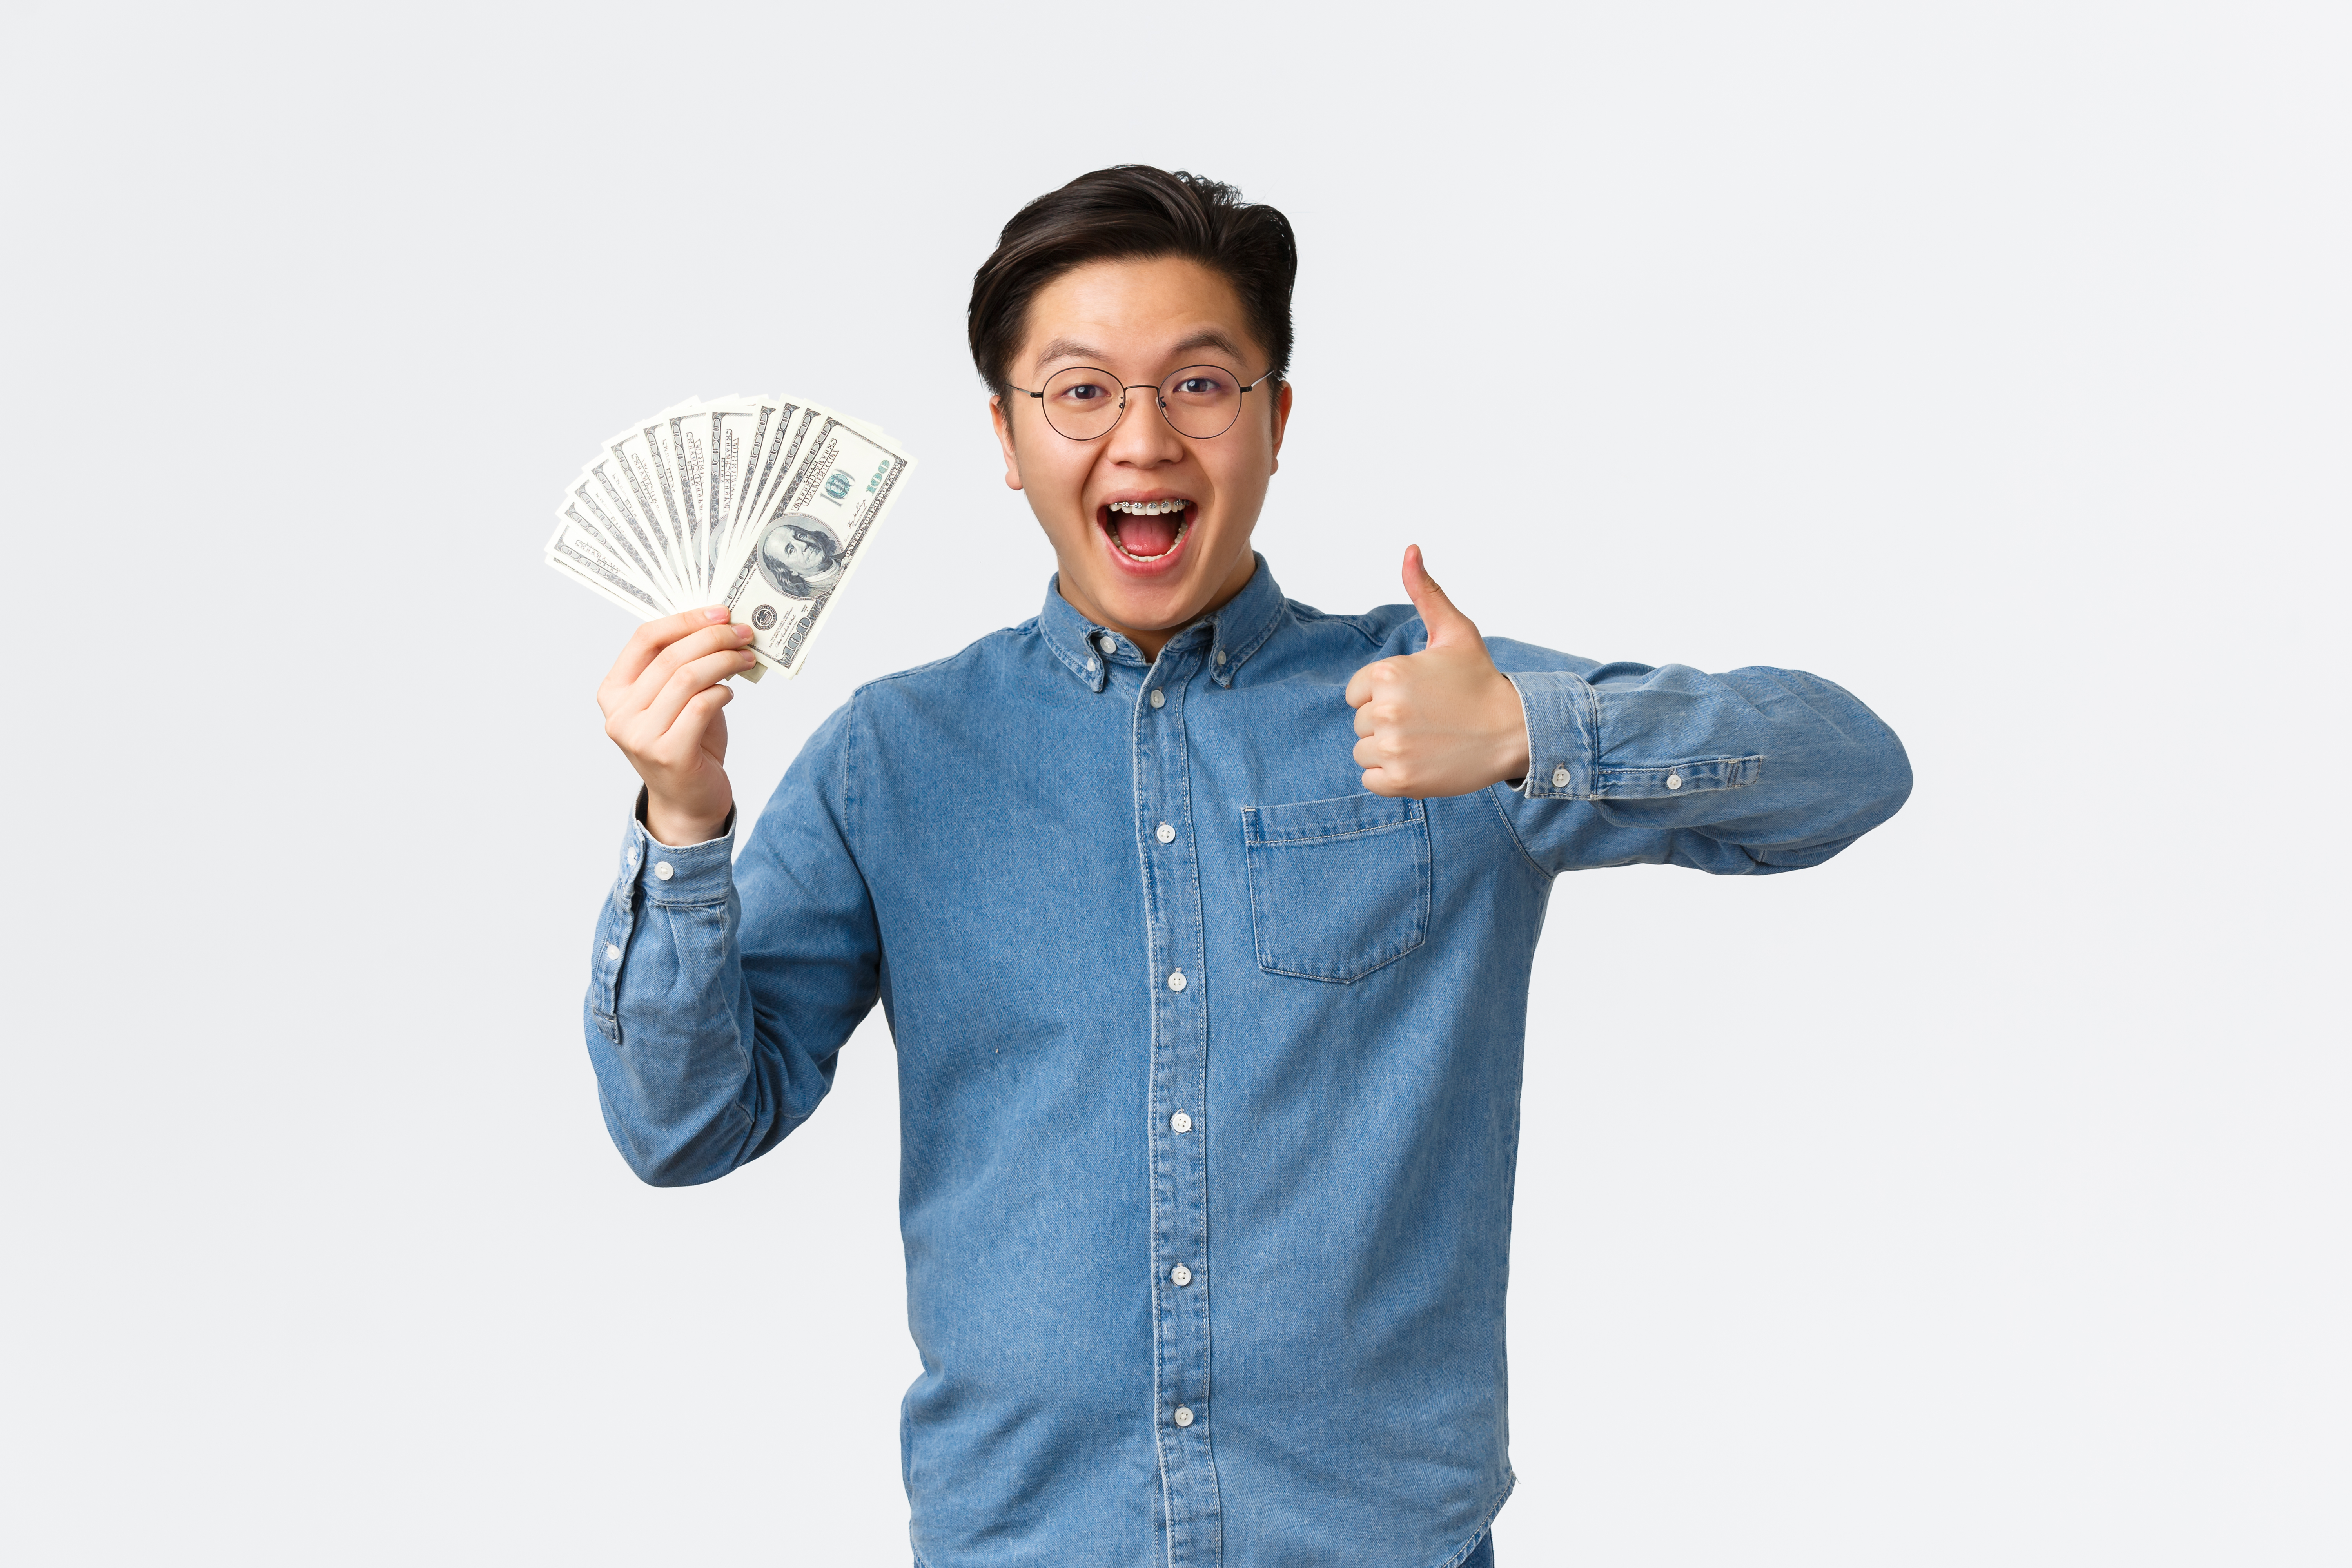 https://img.moneyduck.com/article_attachment/1669106601-excited-smiling-asian-man-with-braces-glasses-showing-thumbsup-waving-money-receive-paycheck.jpg